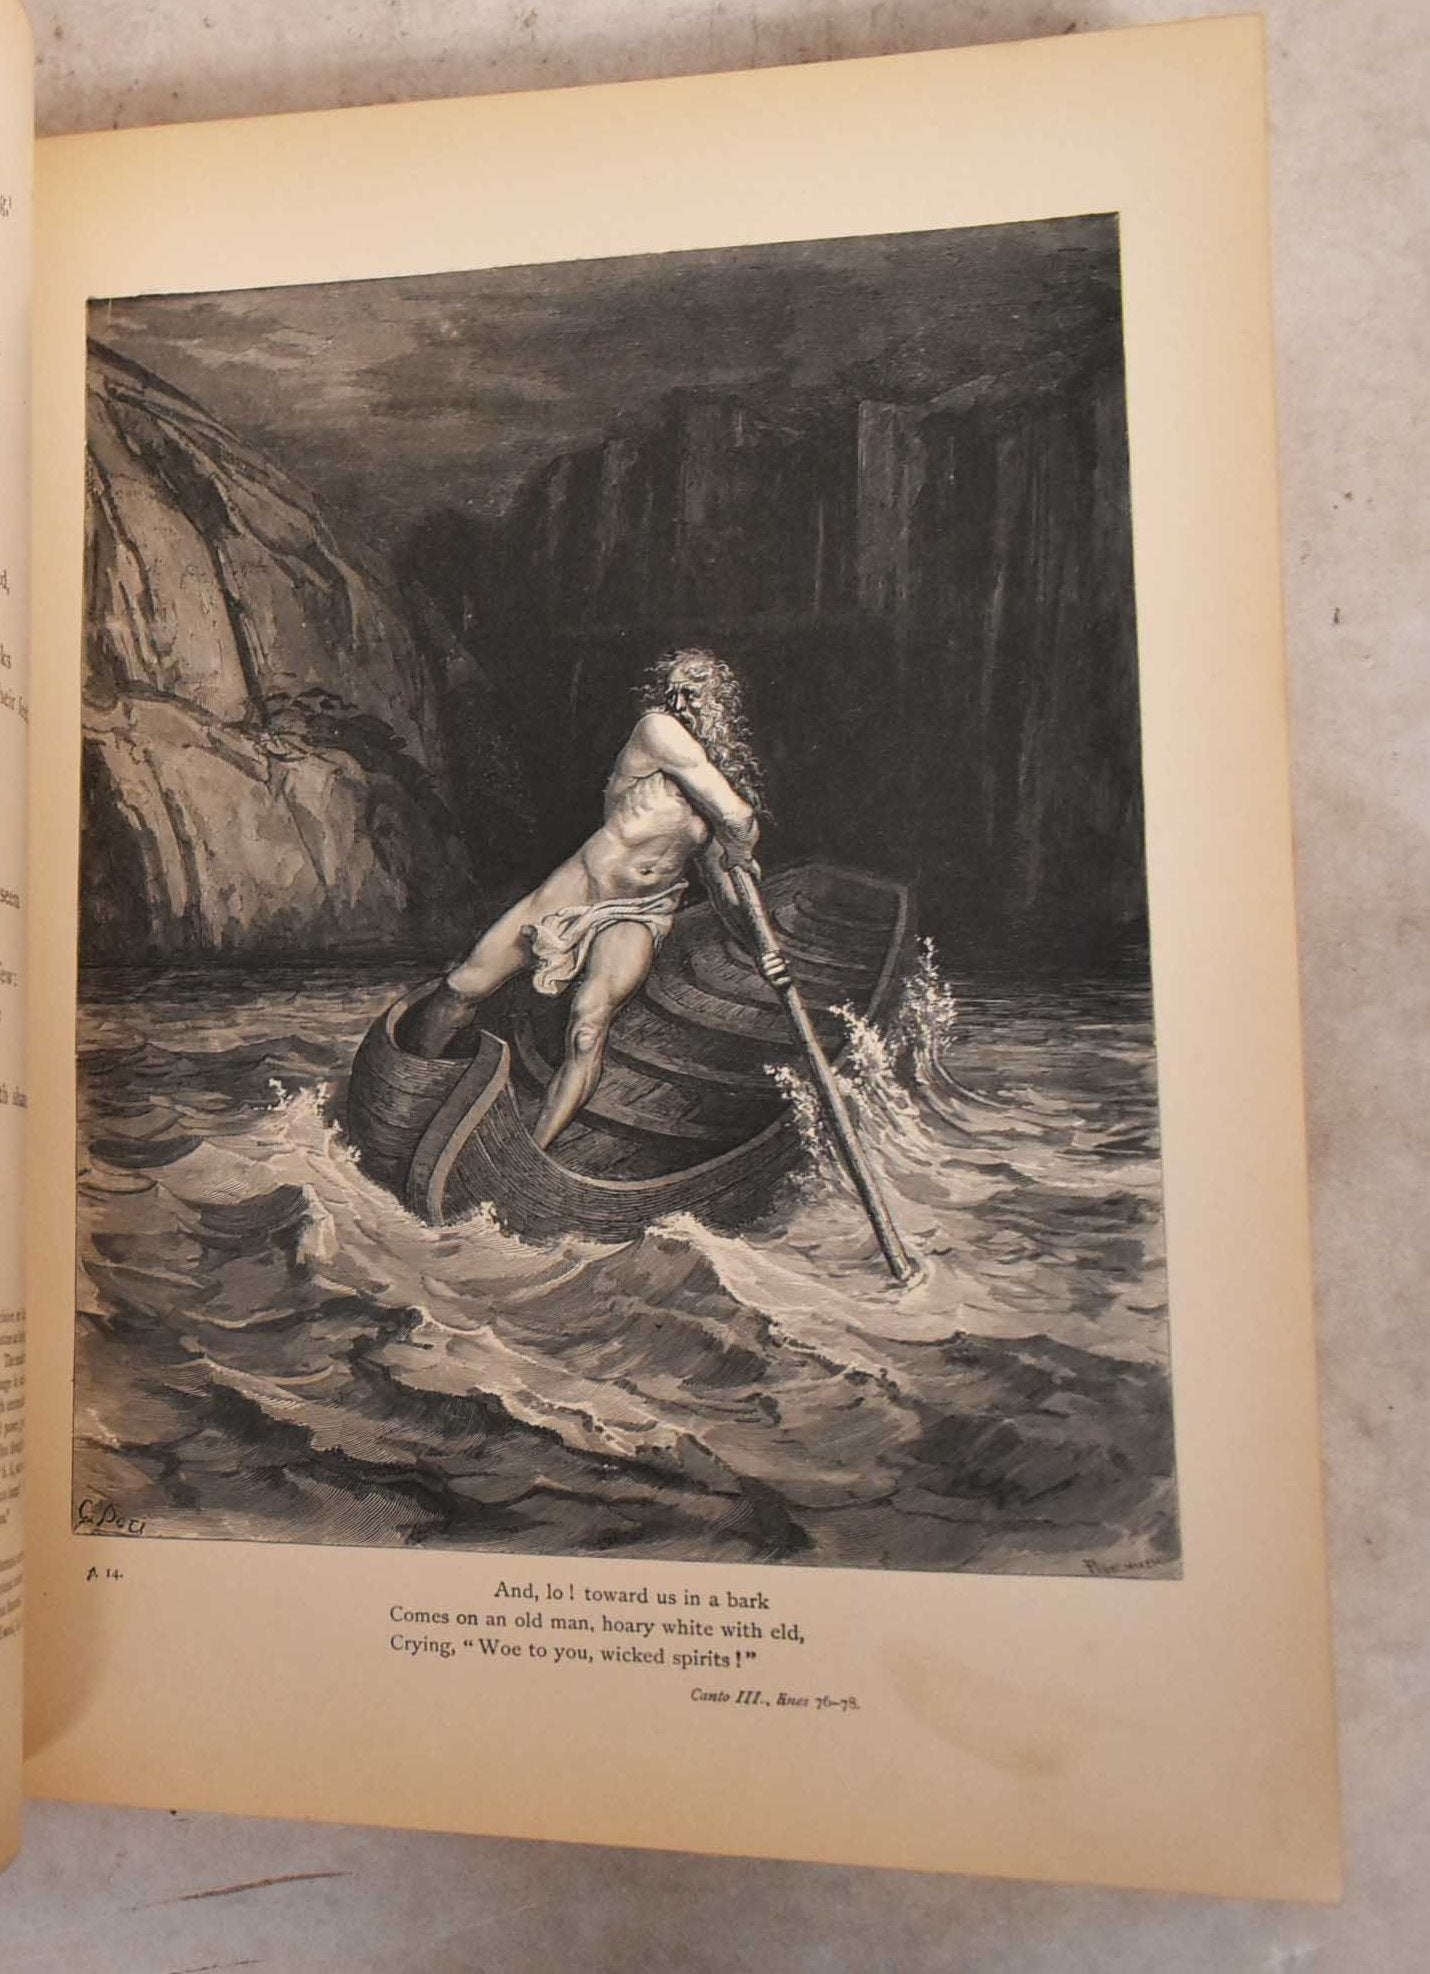 Dante's Inferno. New Edition. Cassell, Petter, Galpin & Co., C19th